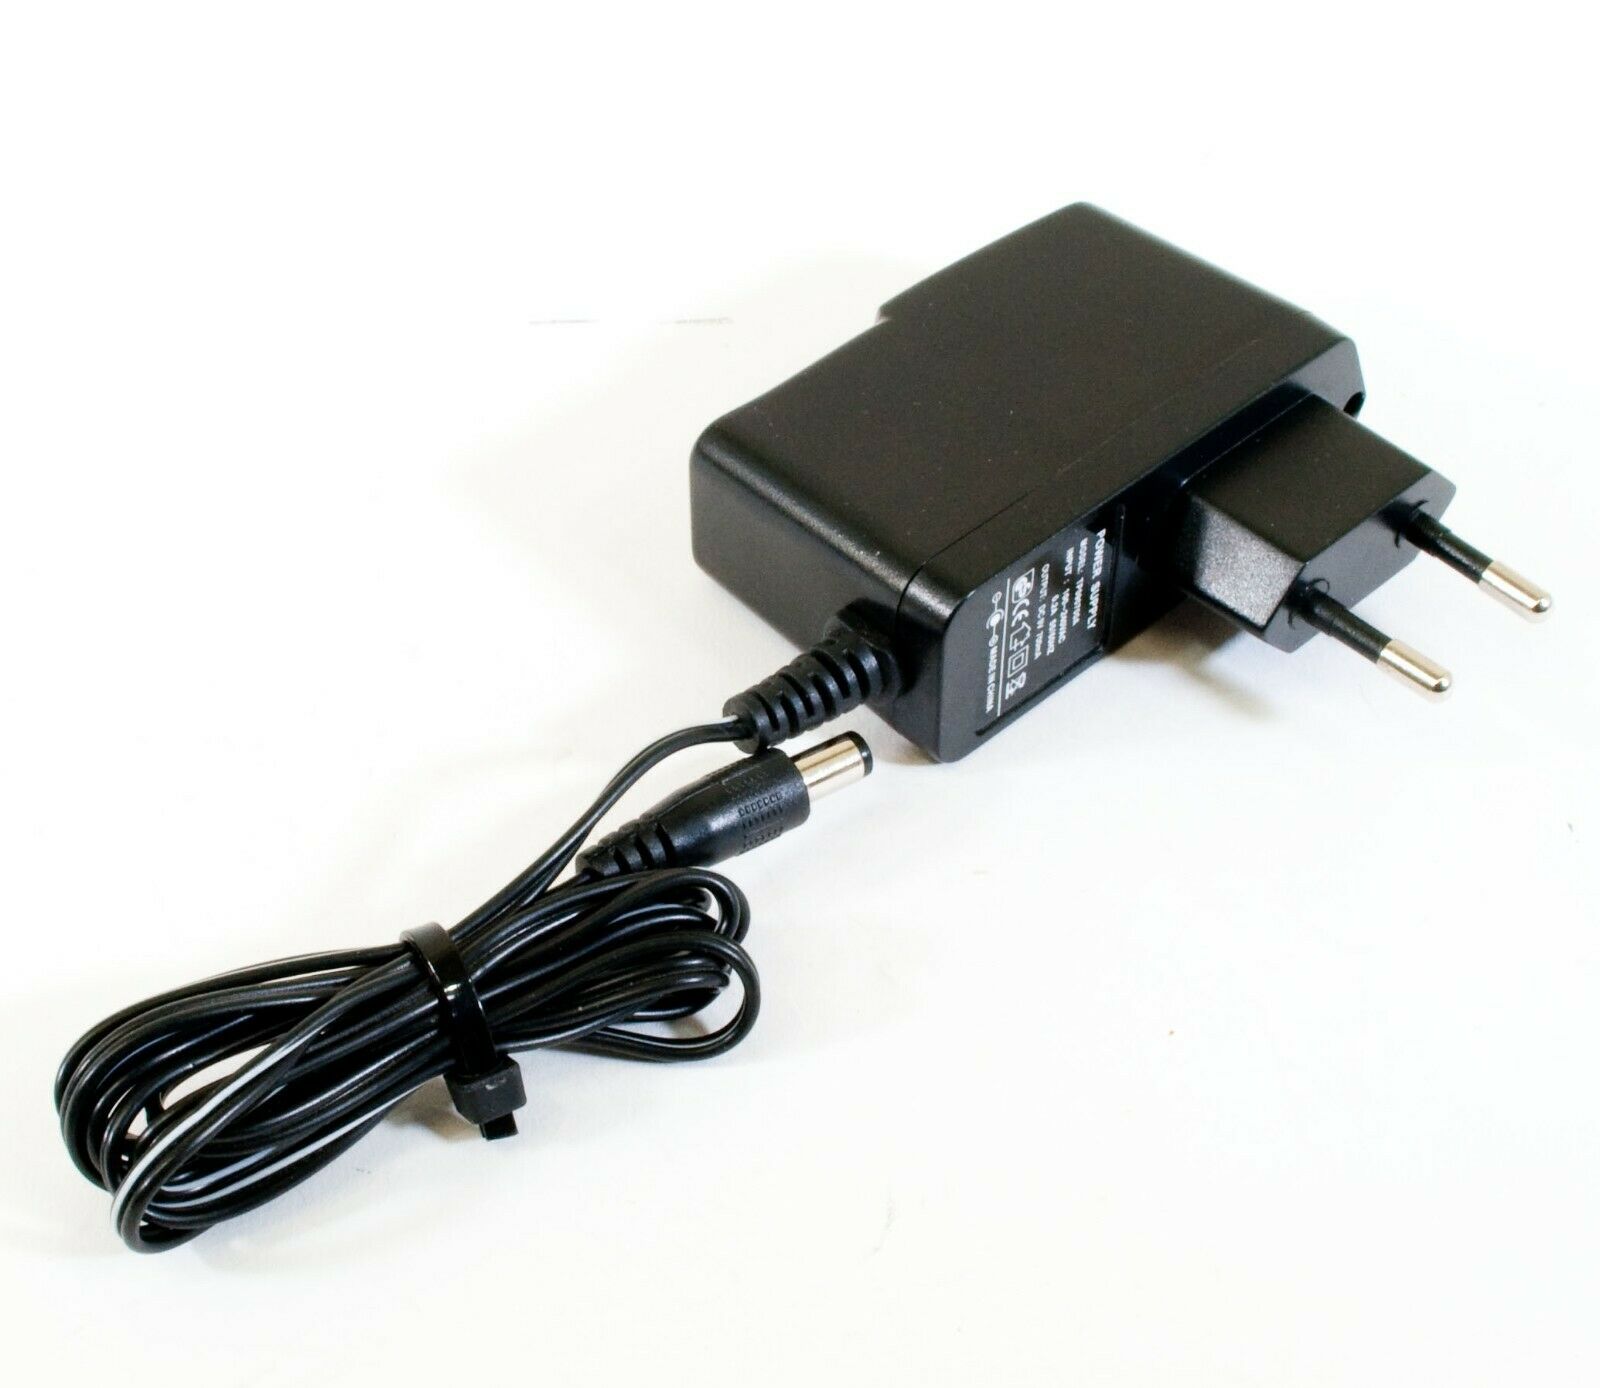 GS TP090700A AC Adapter 9V 700mA Original Charger Power Supply Output Current: 700 mA Voltage: 9 V MPN: TP090700A Ty